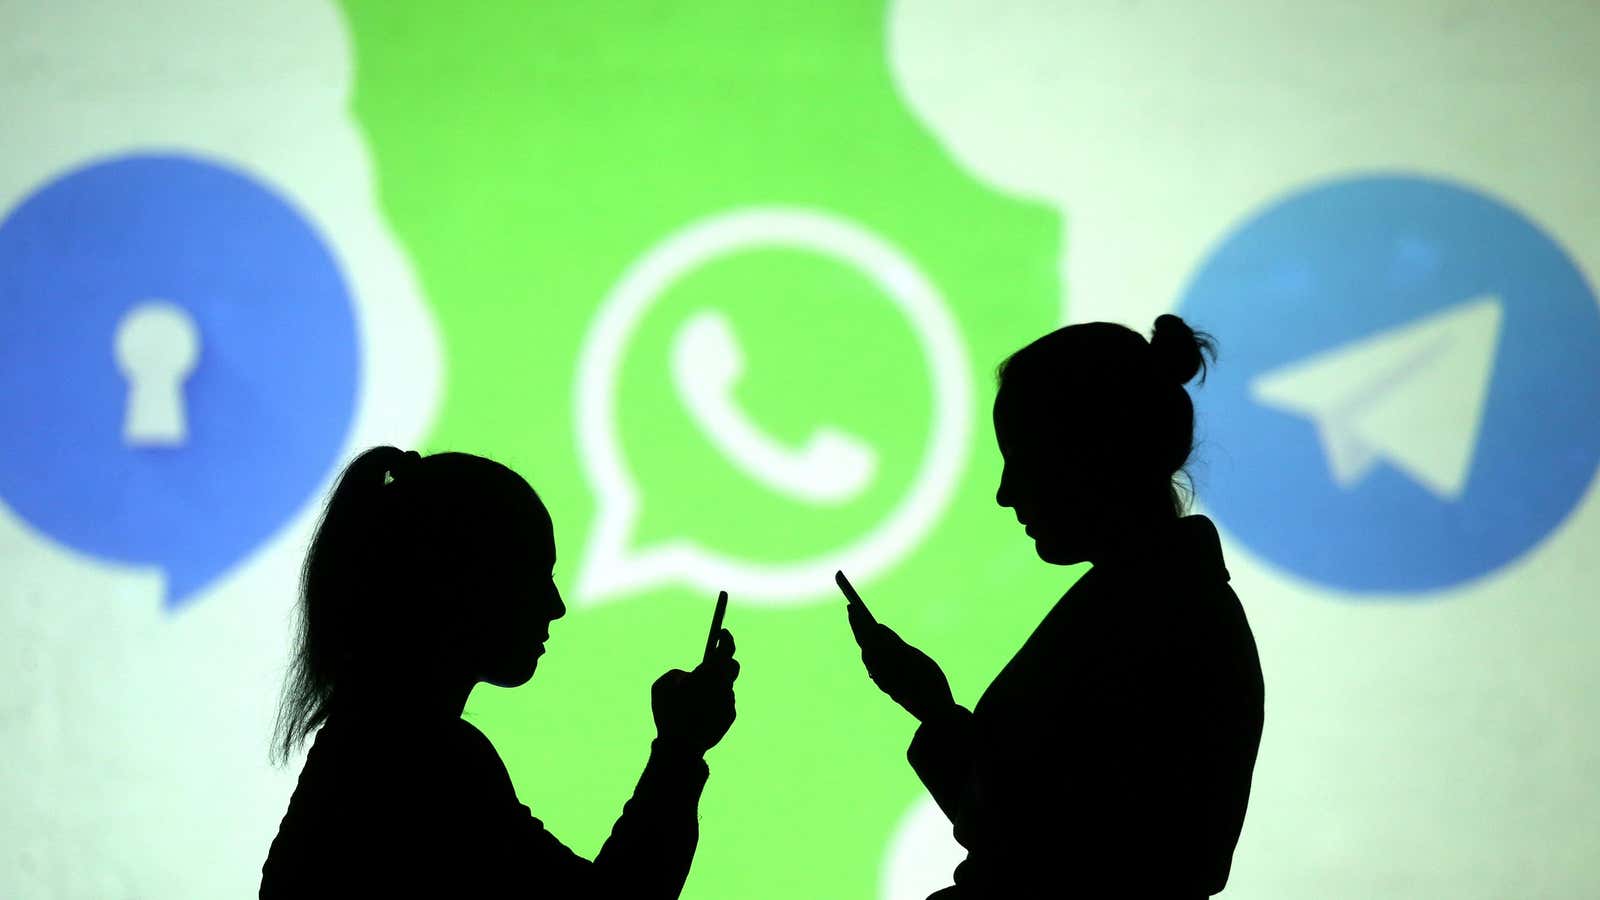 India has blocked 14 mobile messenger apps on security fears